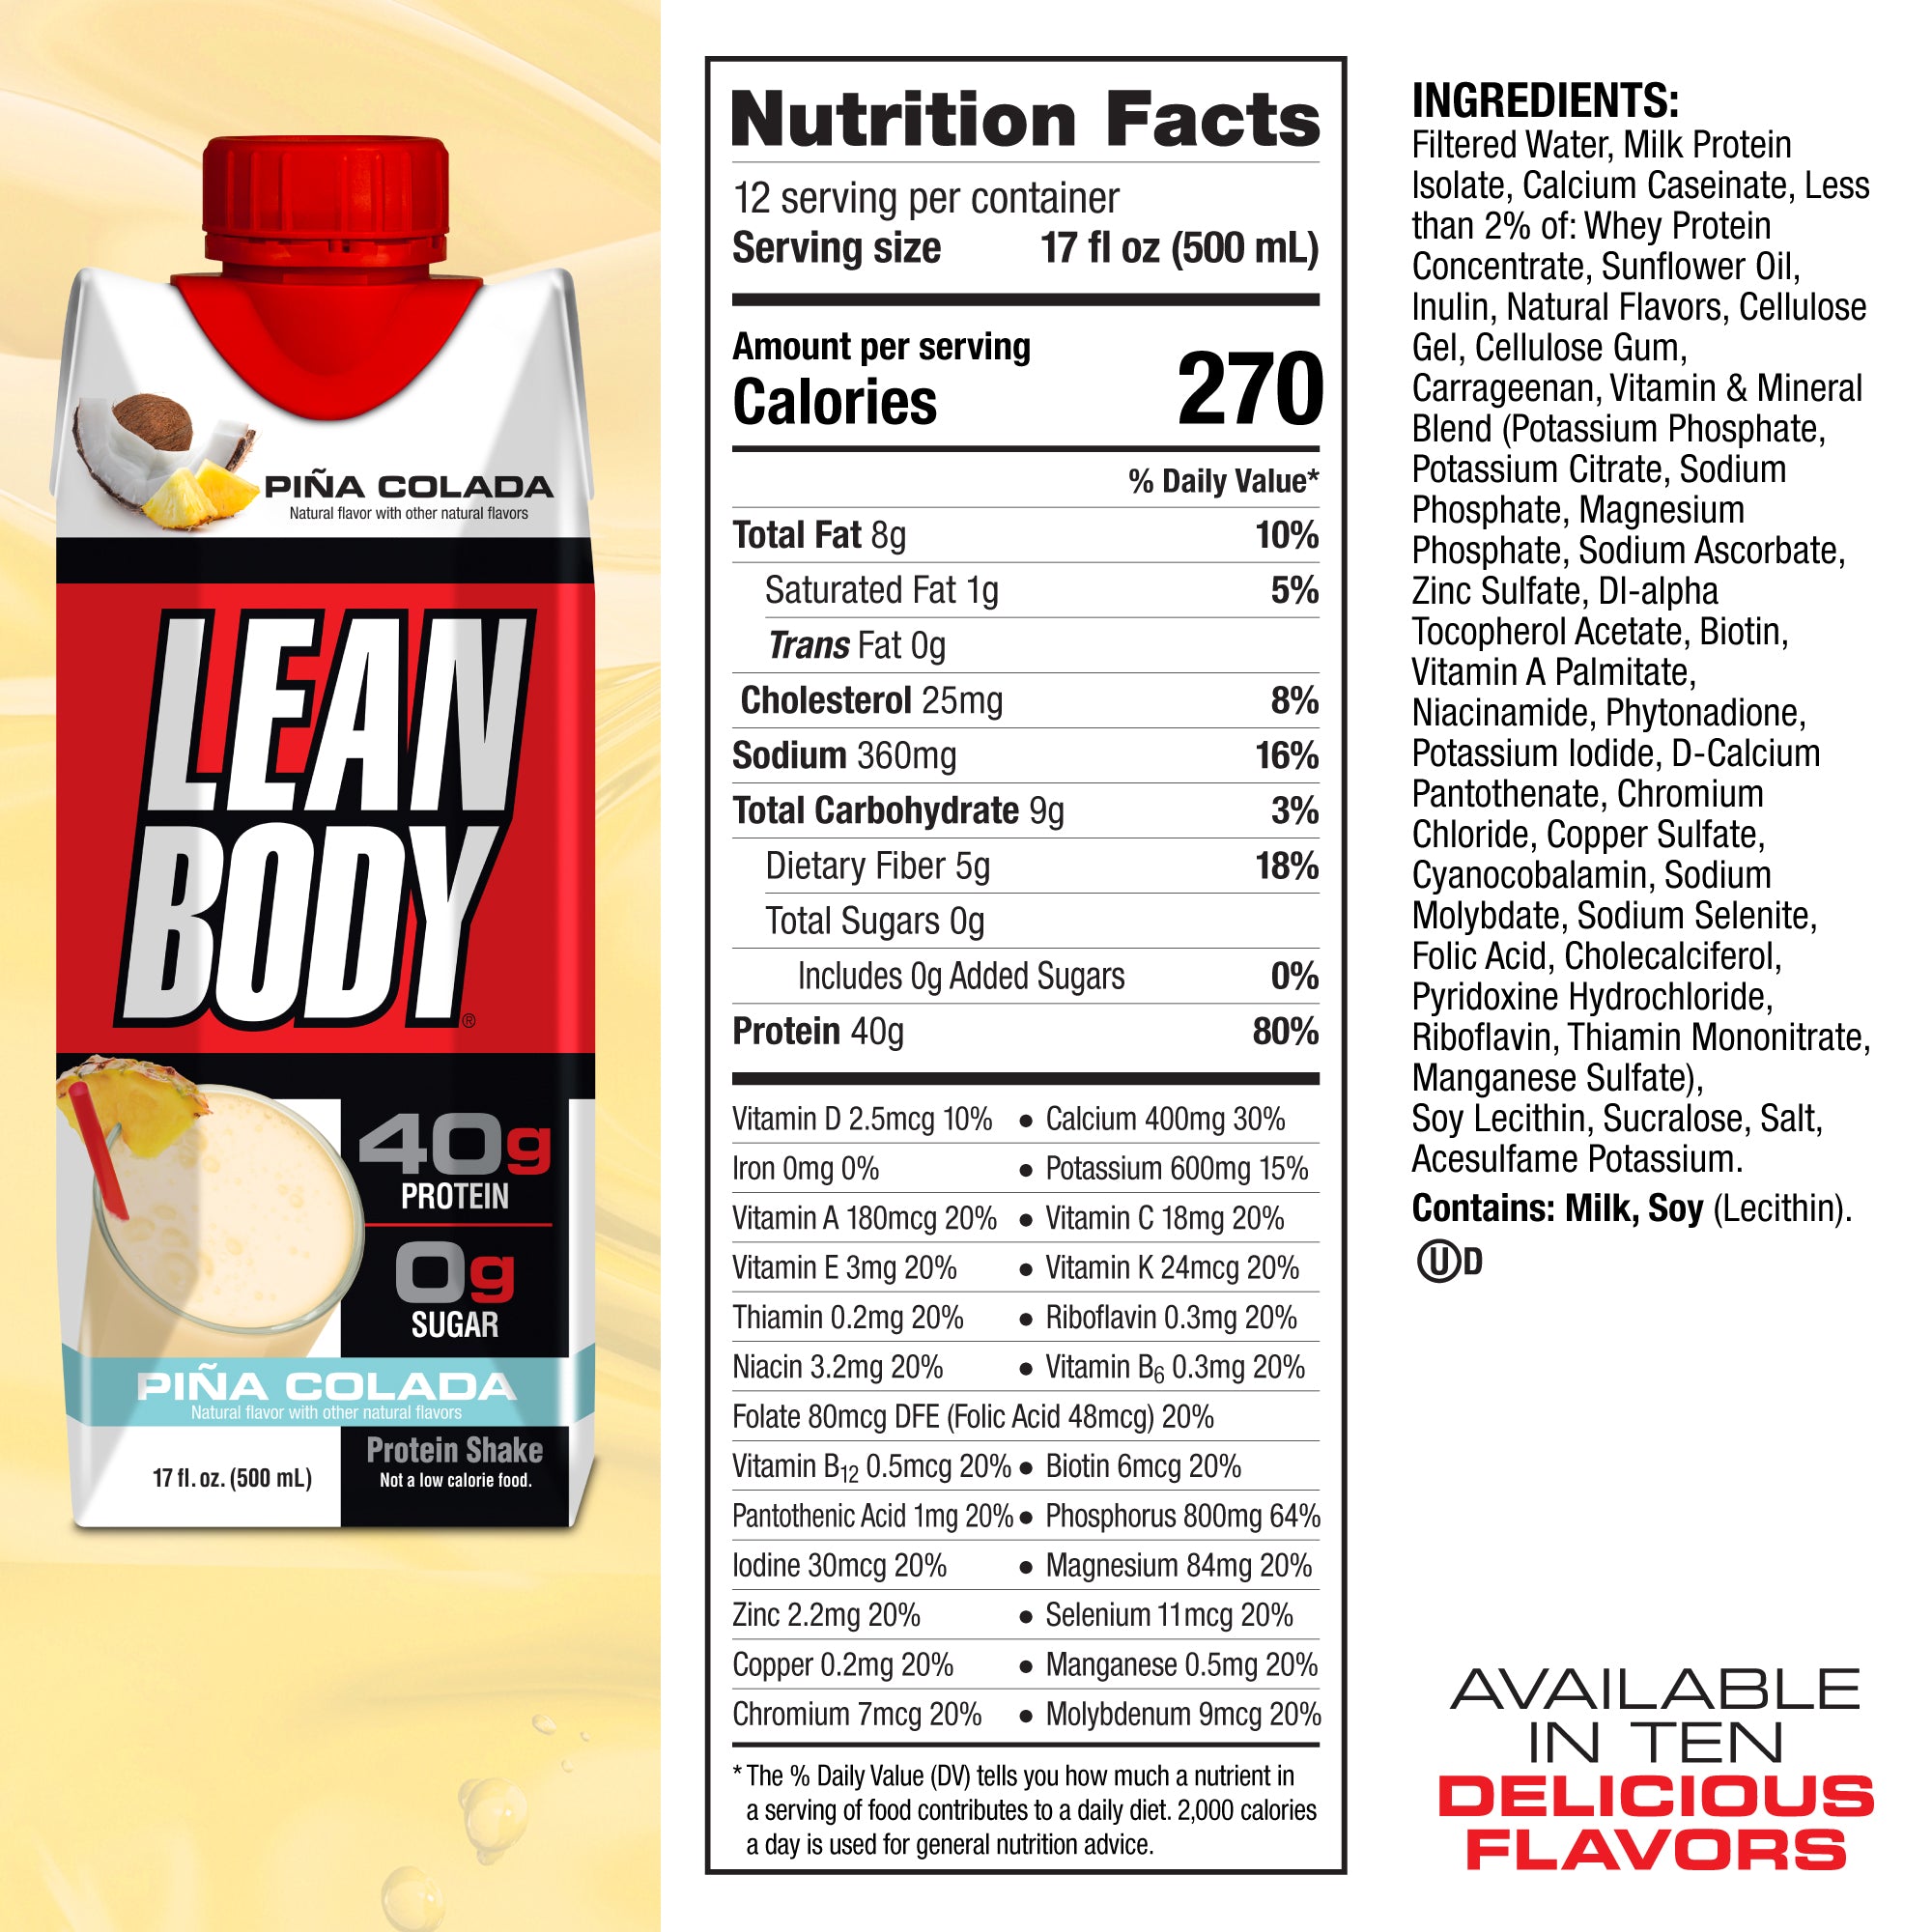 Lean Body Ready-to-Drink Protein Shake (17oz) 12 Pack